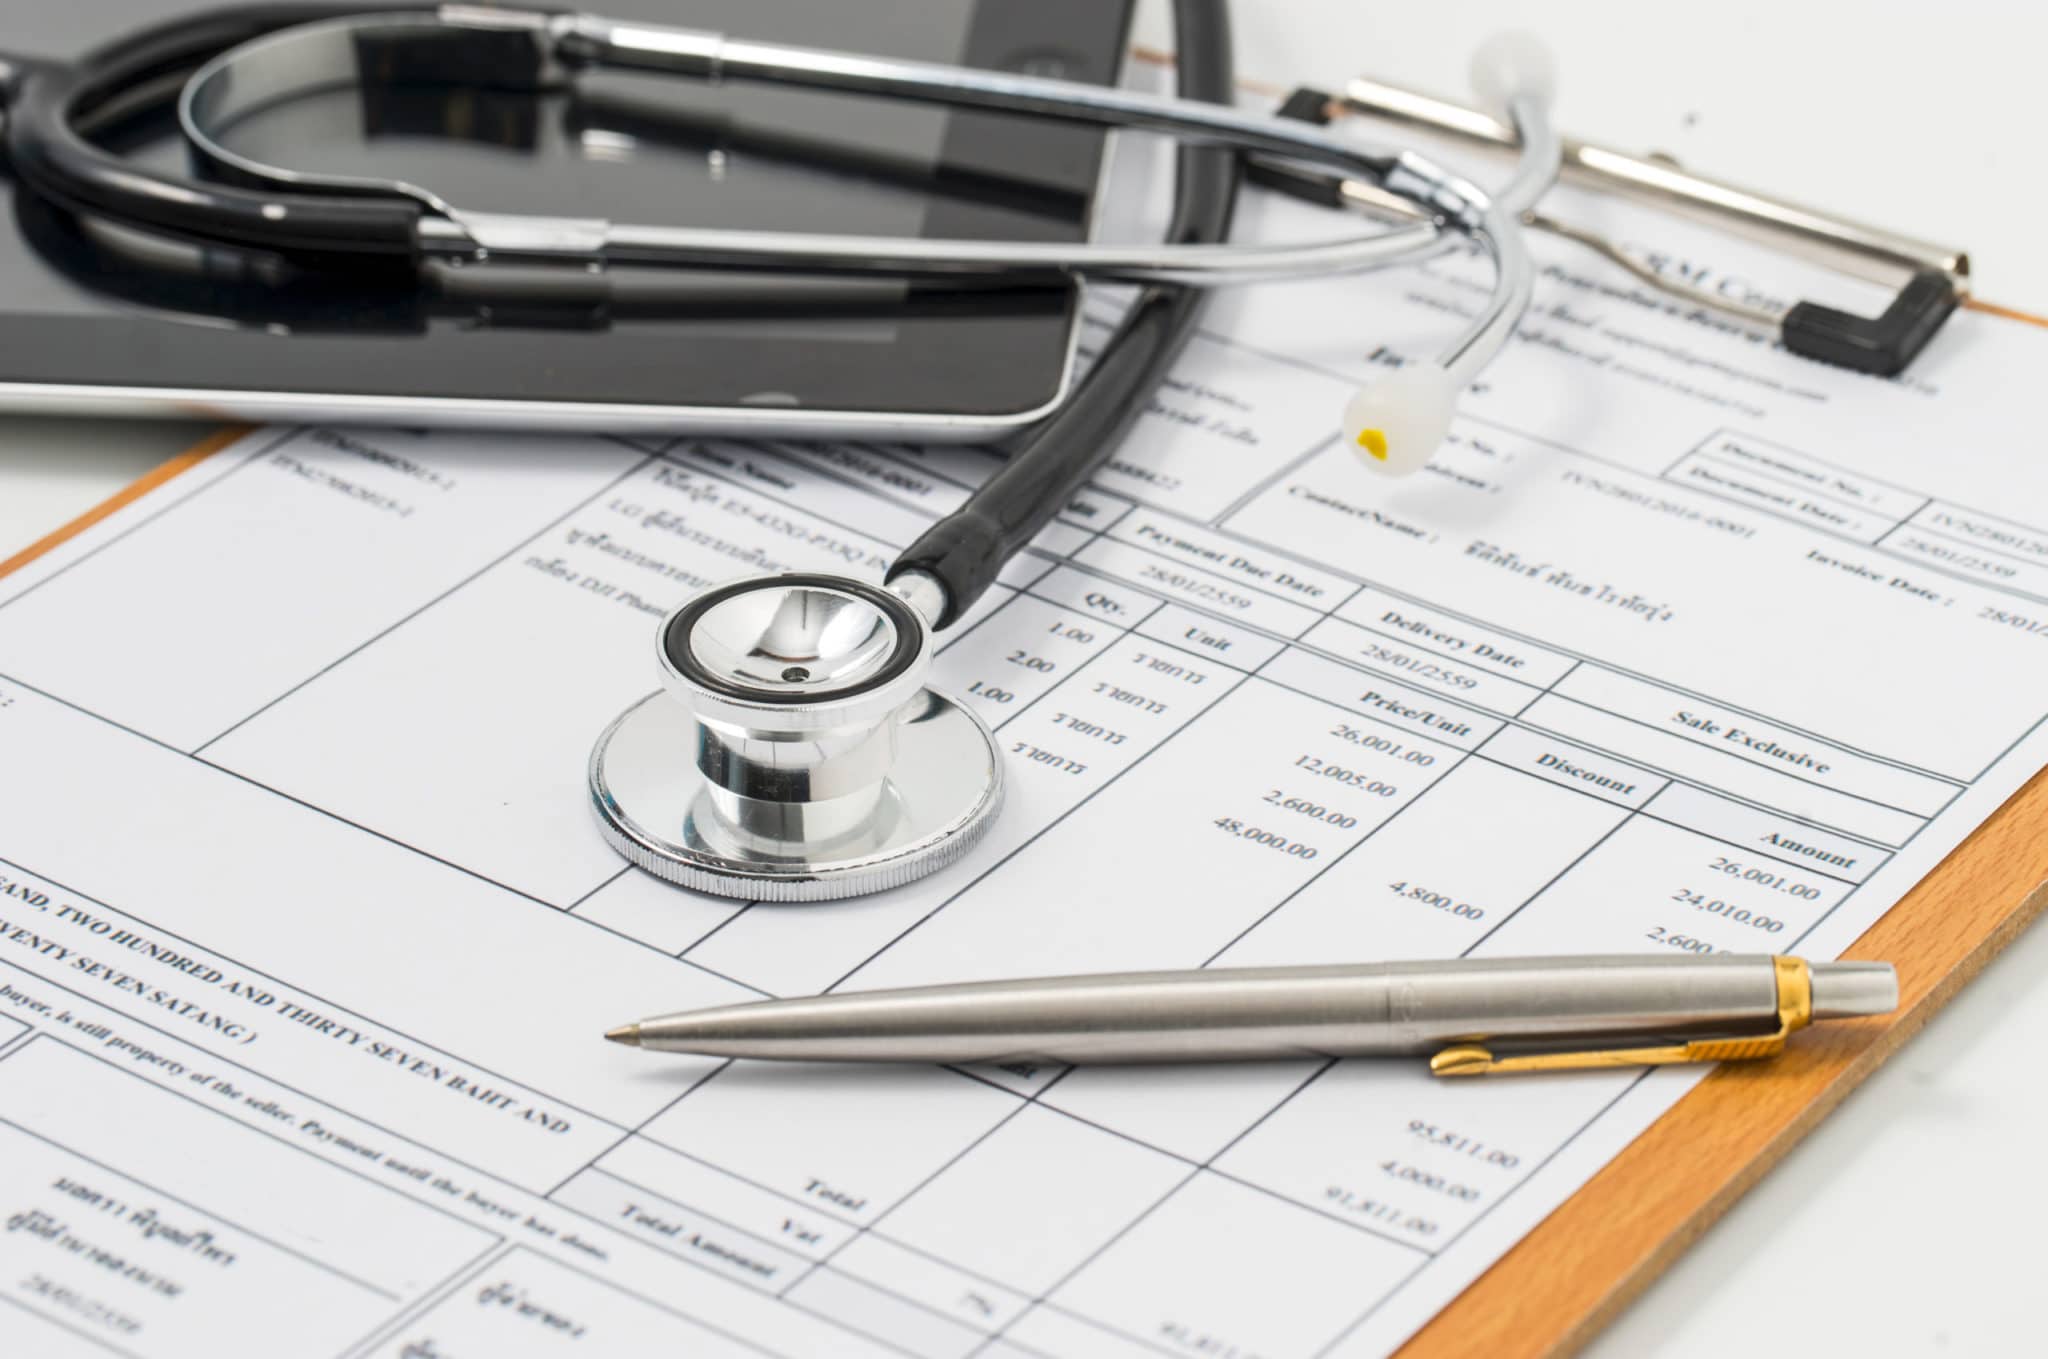 Stethoscope on medical billing statement on table